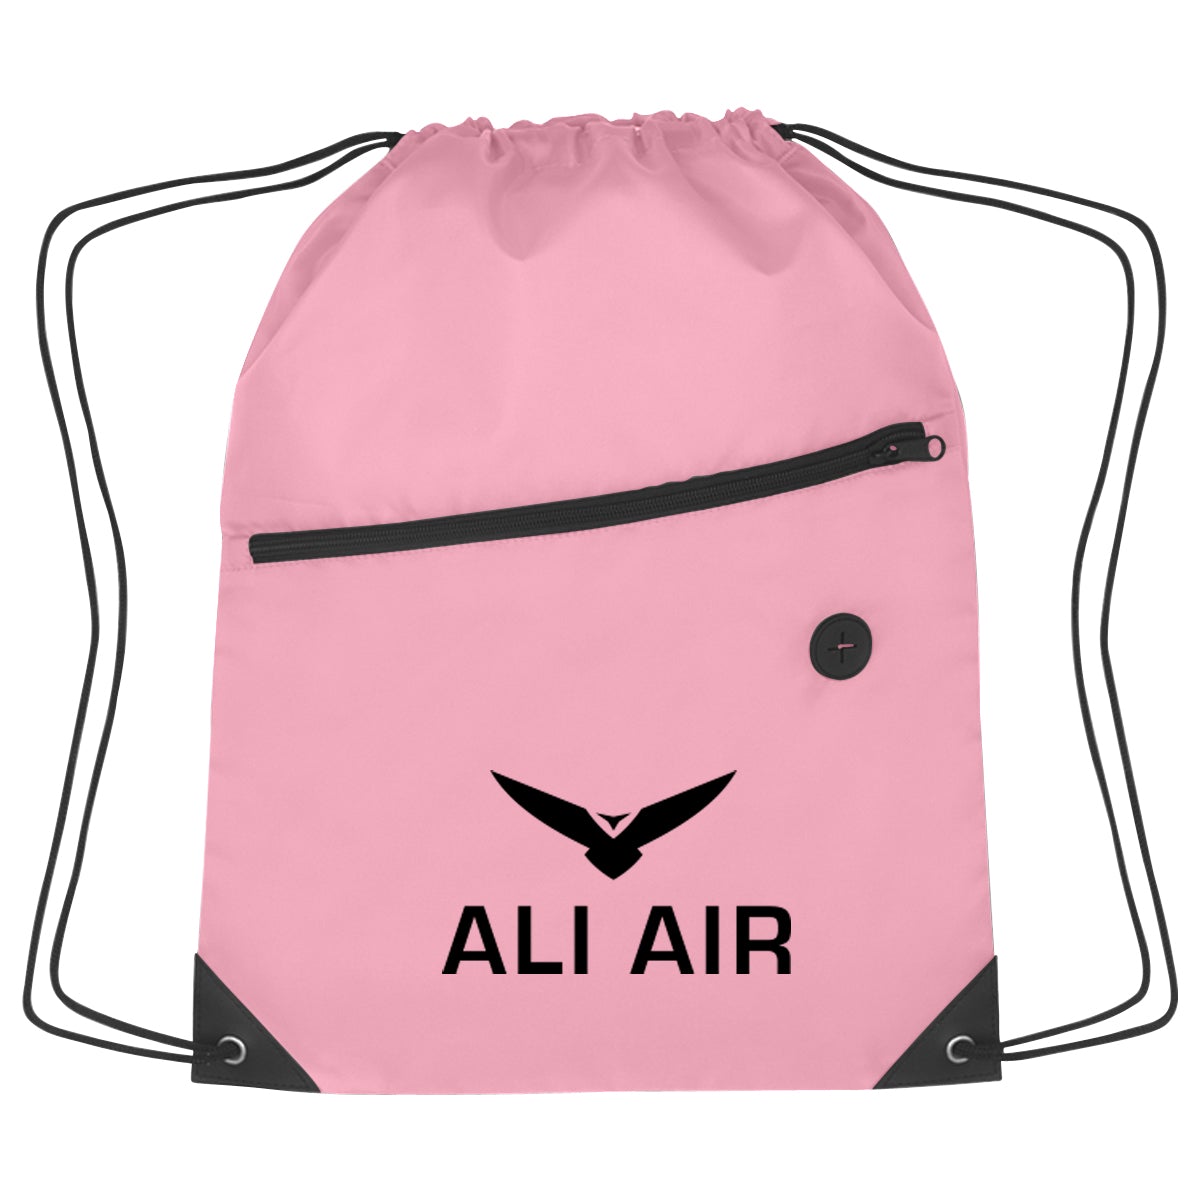 Hit Sports Pack with Front Zipper Drawstring Bags Hit Promo Pink Single Color 